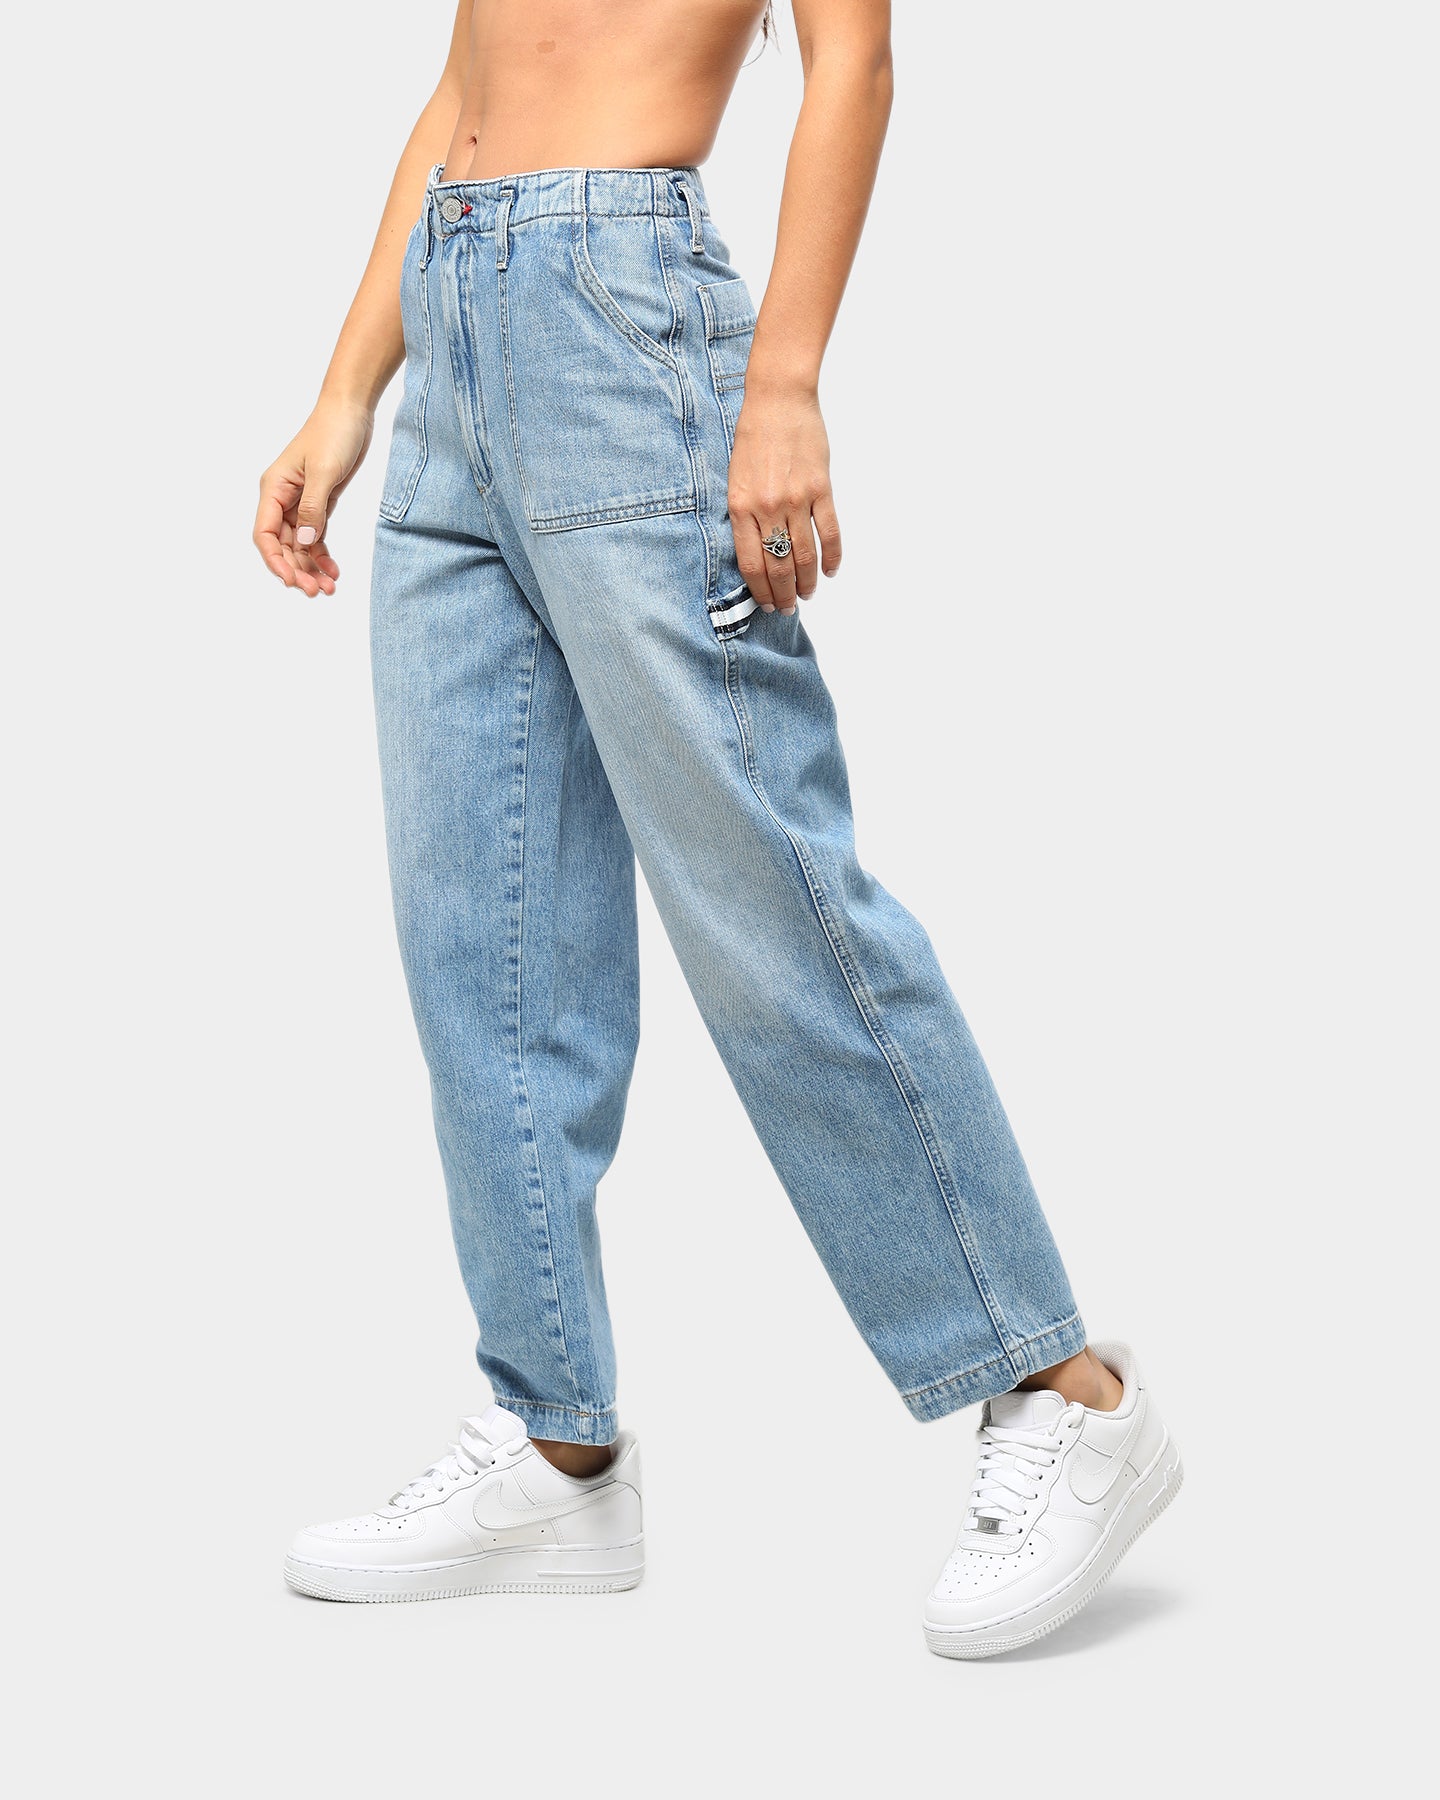 jeans pant cargo